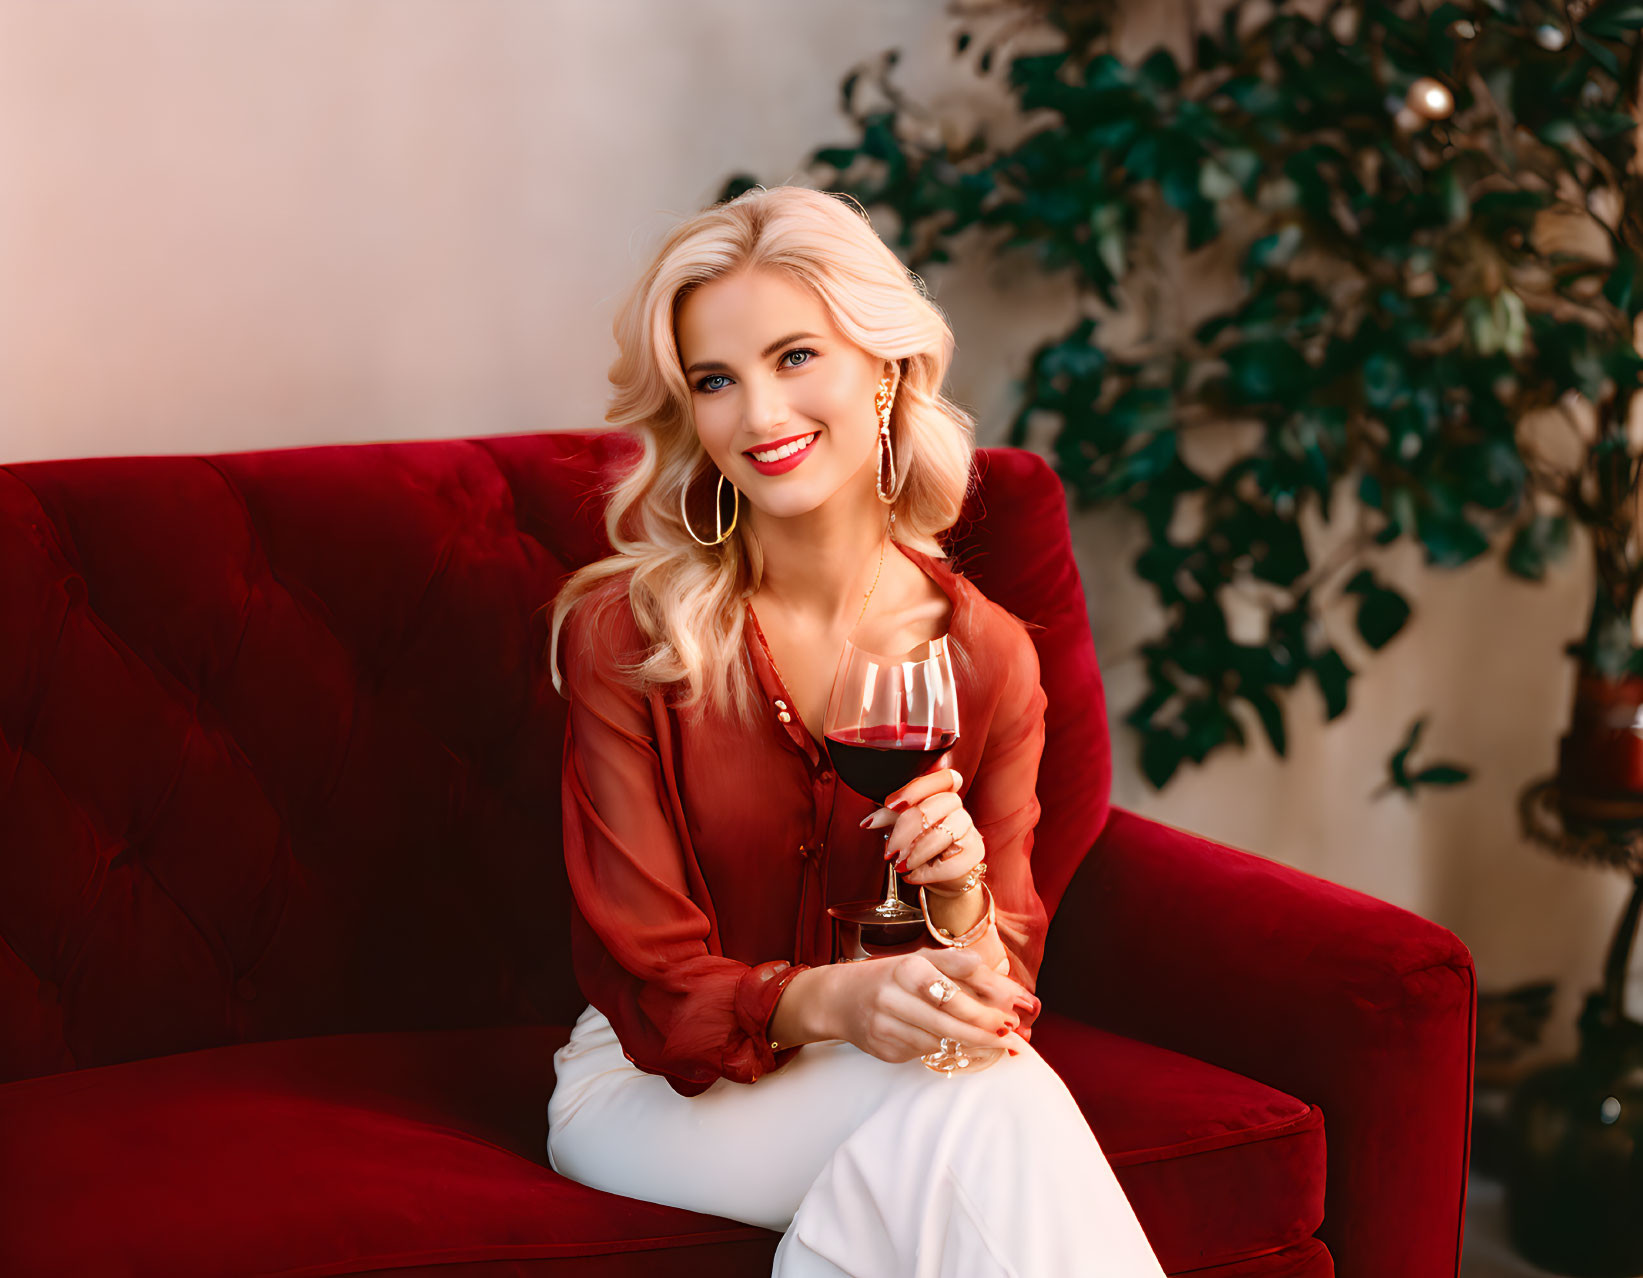 Blonde woman on red sofa with wine glass and plant background